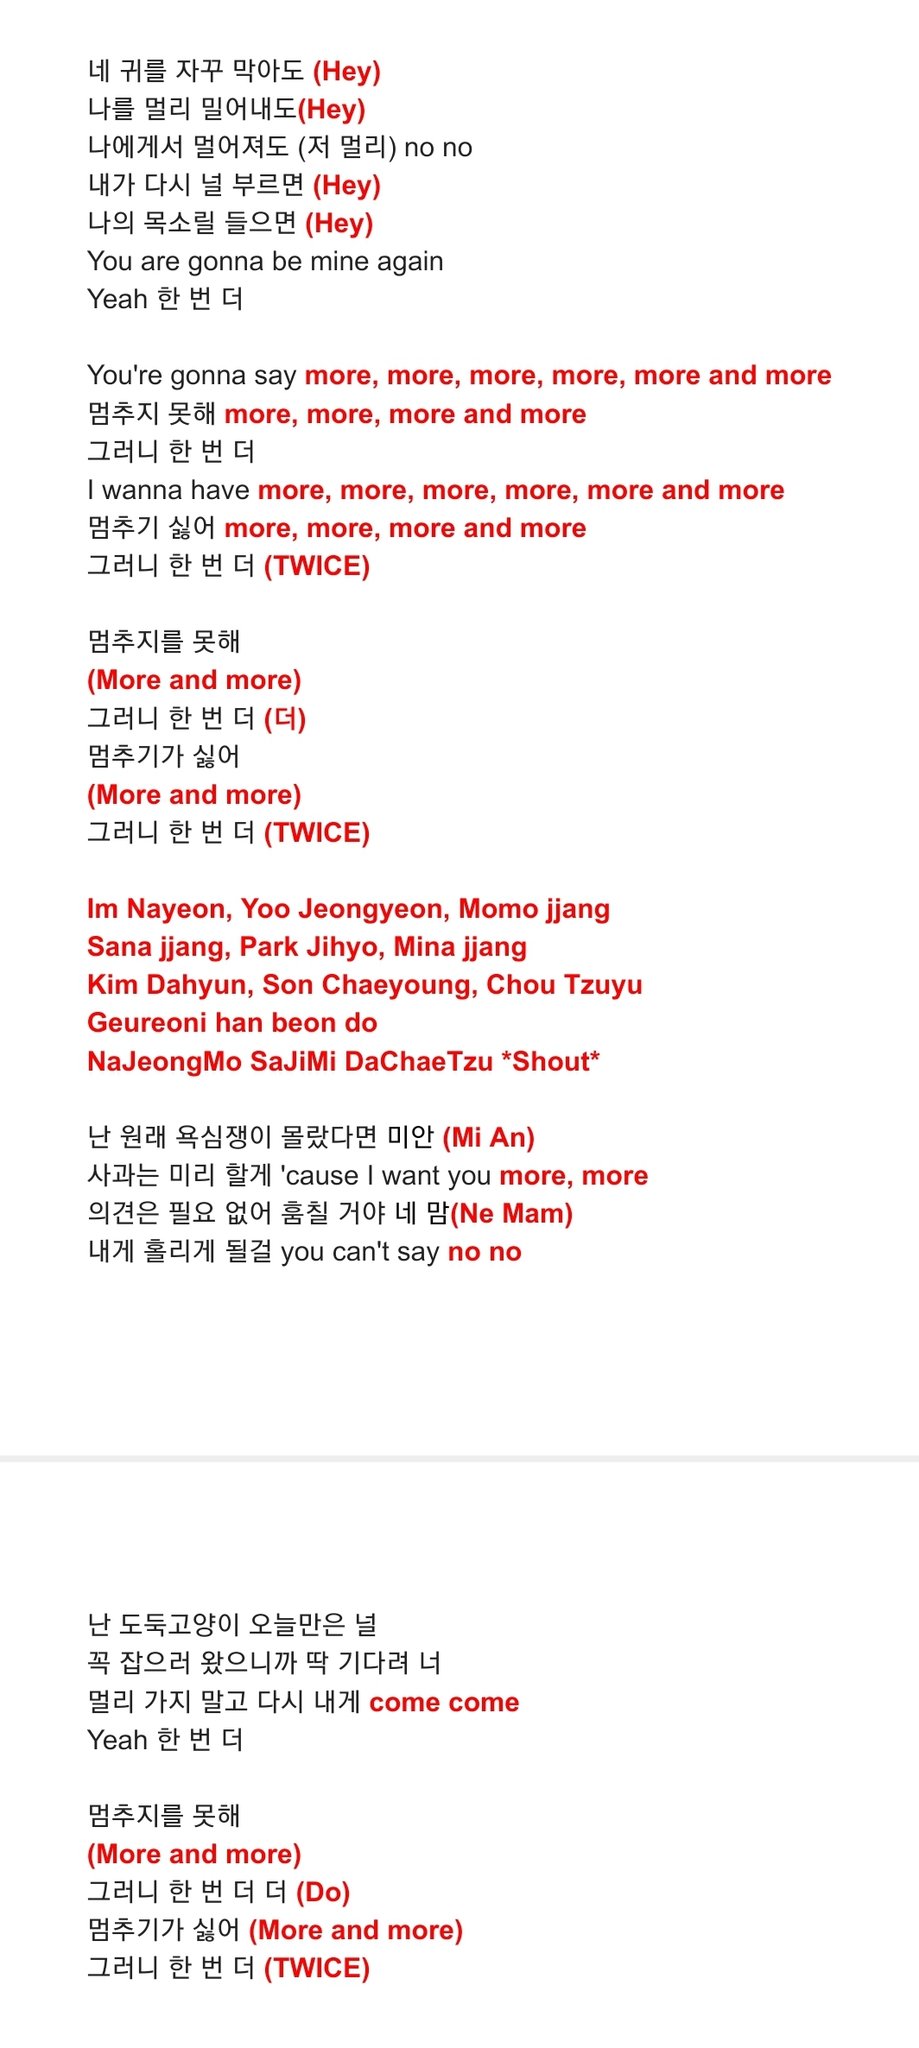 Sk Twice More Amp More Cheering Guide Romanized Jypetwice You Can View On Google Doc For Easier Reference T Co Jjmfv8bgq6 T Co 1yh7uic3nx Twitter